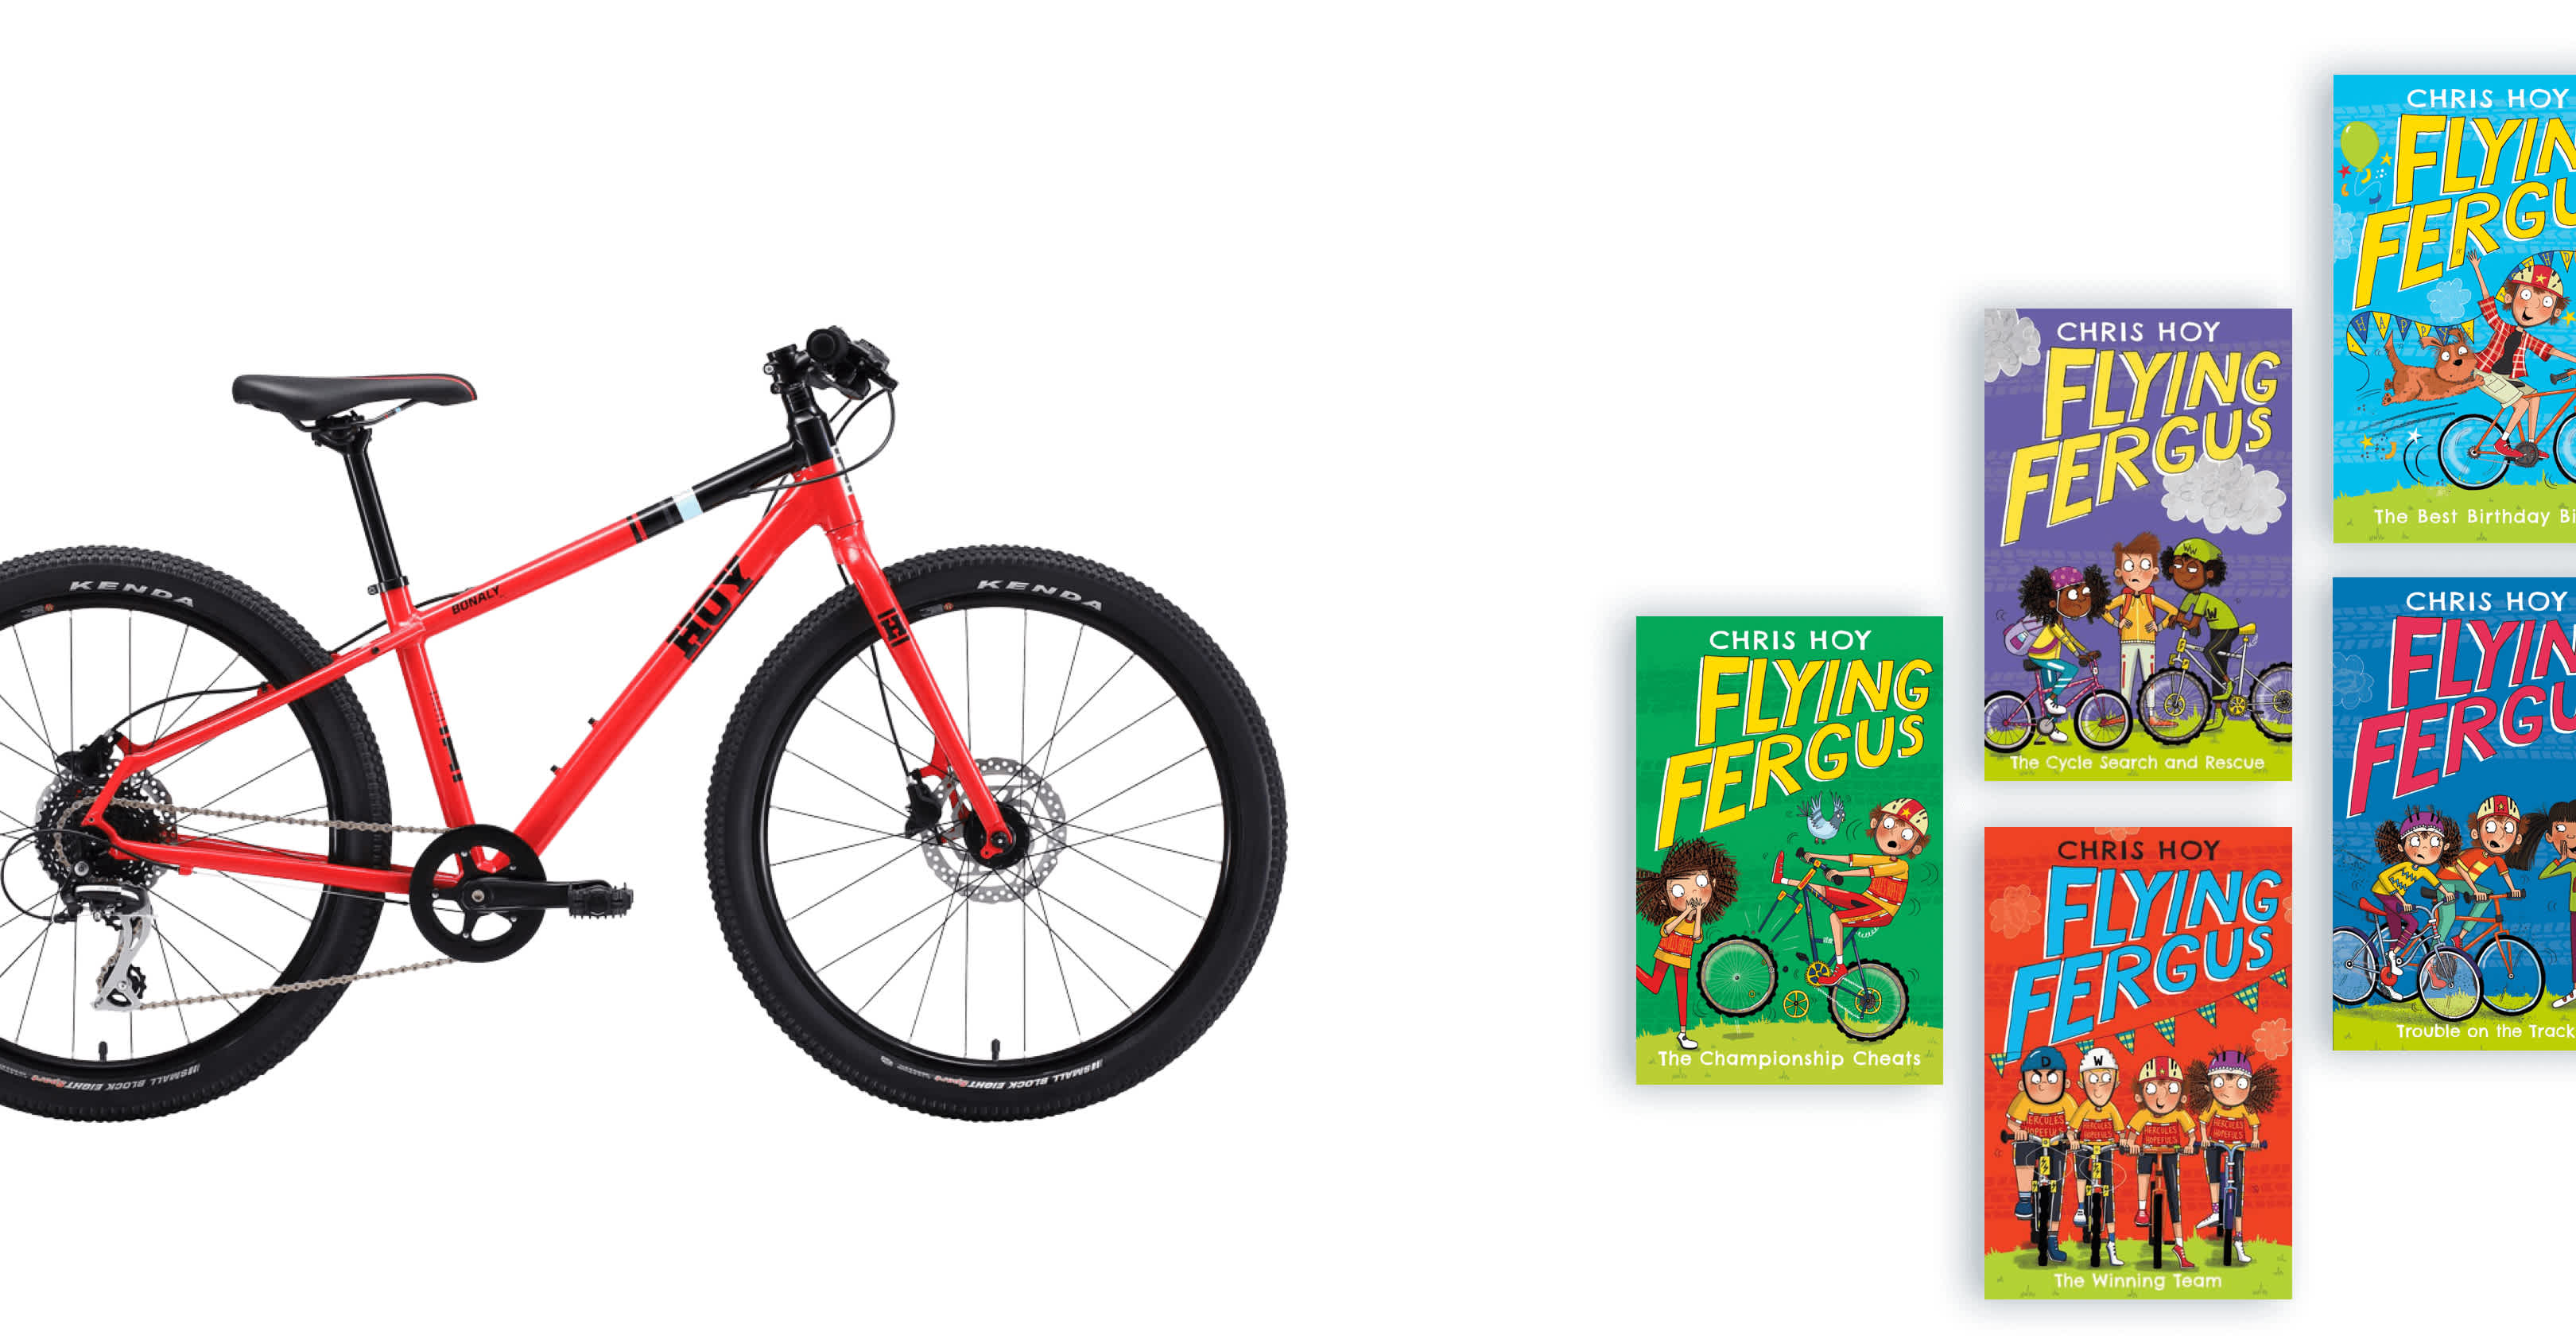 Image of a Hoy bicycle and the Flying Fergus books